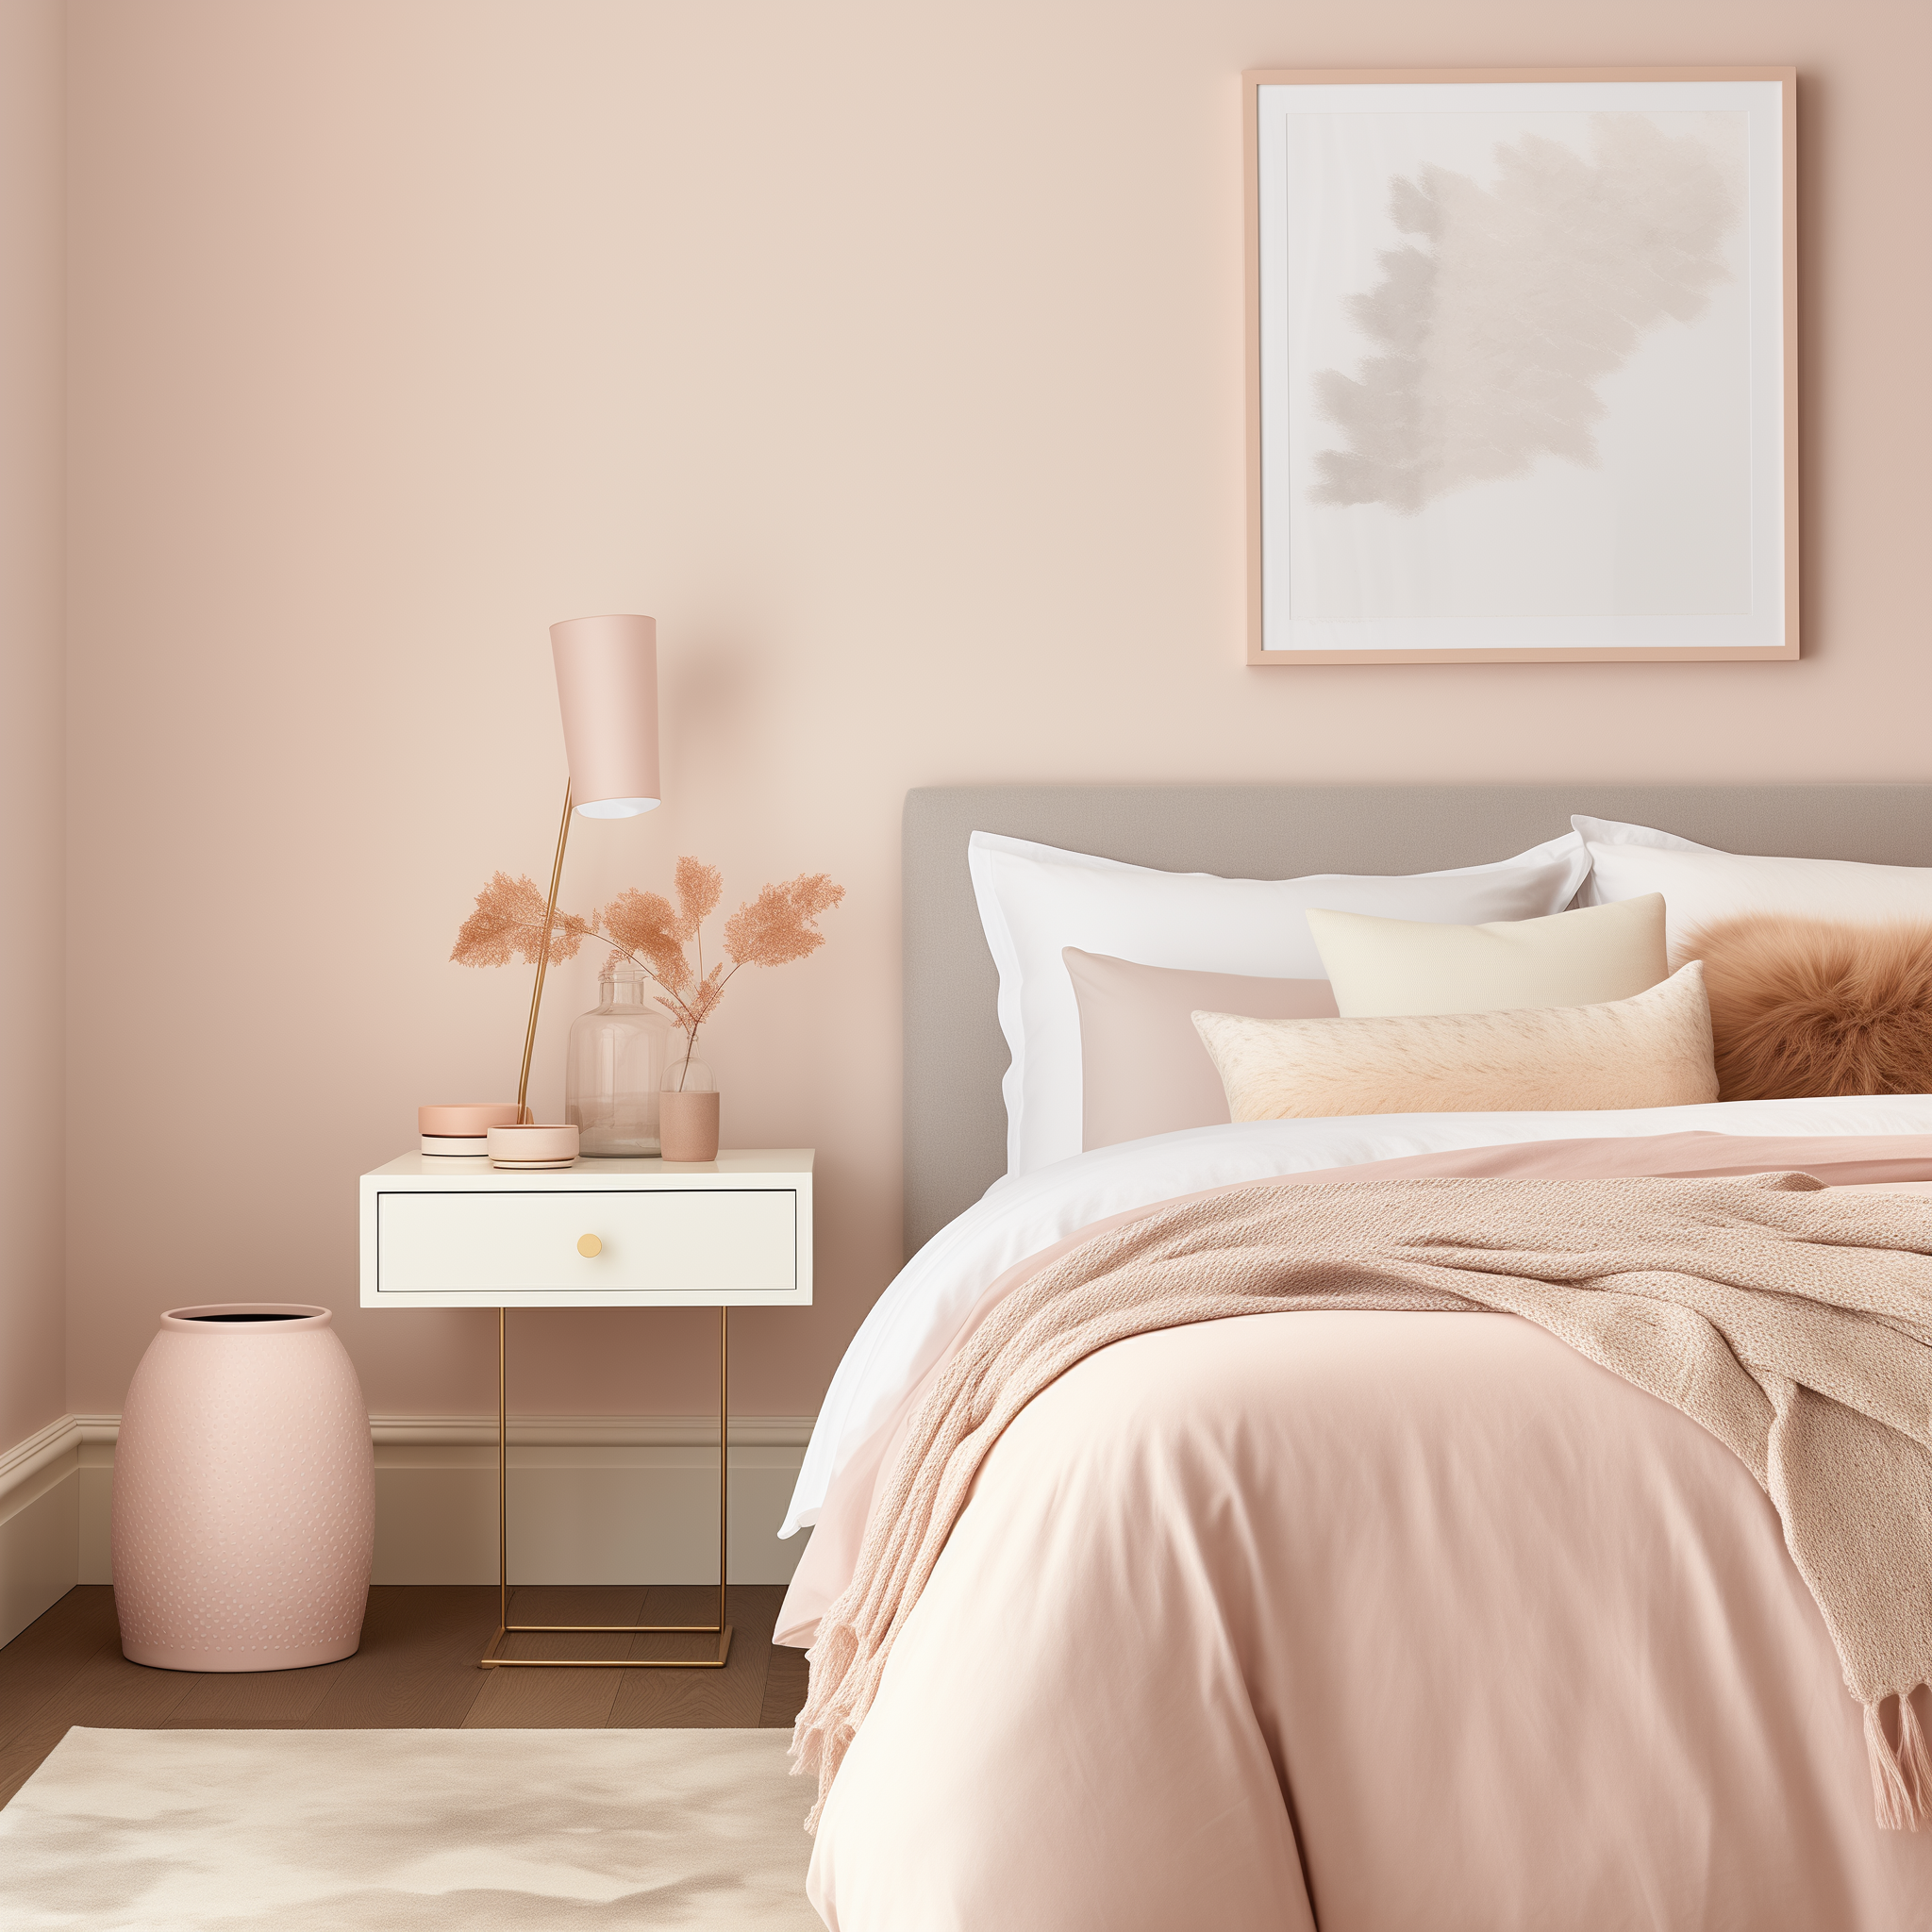 Bedroom with soft pink walls